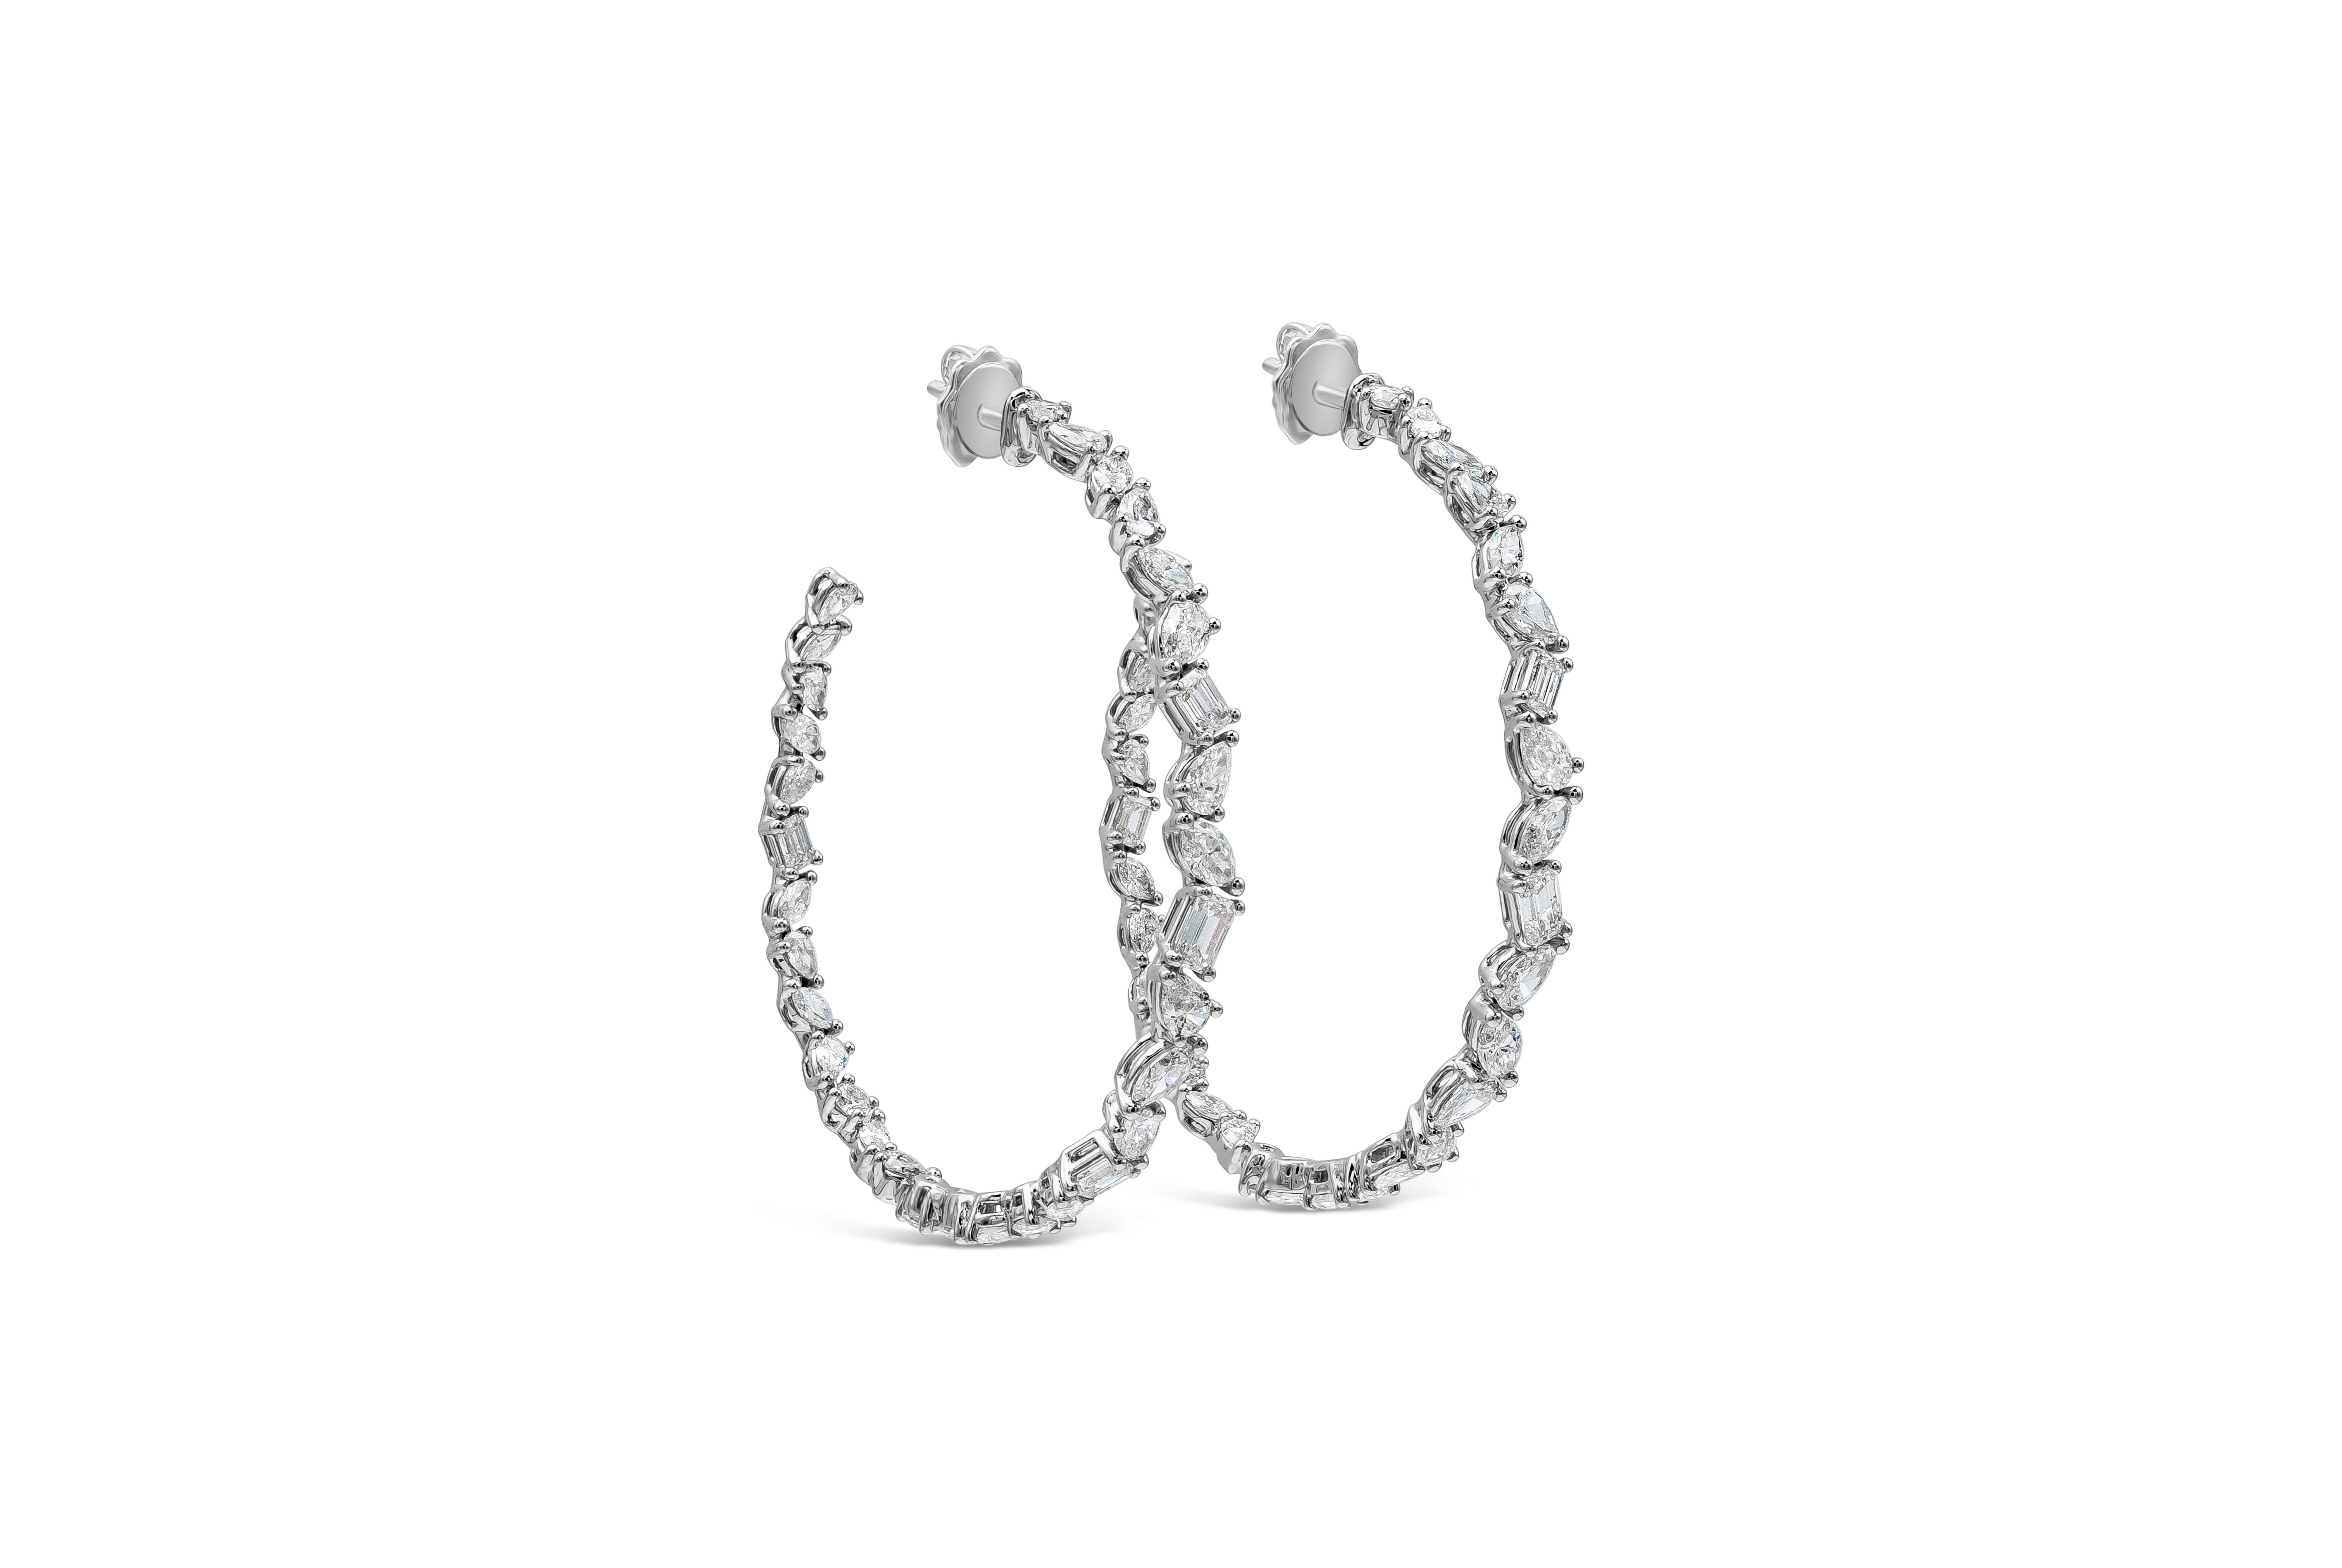 A chic and modern take on the classic hoop earrings. Showcasing a row of mixed shape diamonds, set in a zigzag design made in 18k white gold. Diamonds weigh 6.08 carats total.

Style available in different price ranges. Price are based on your